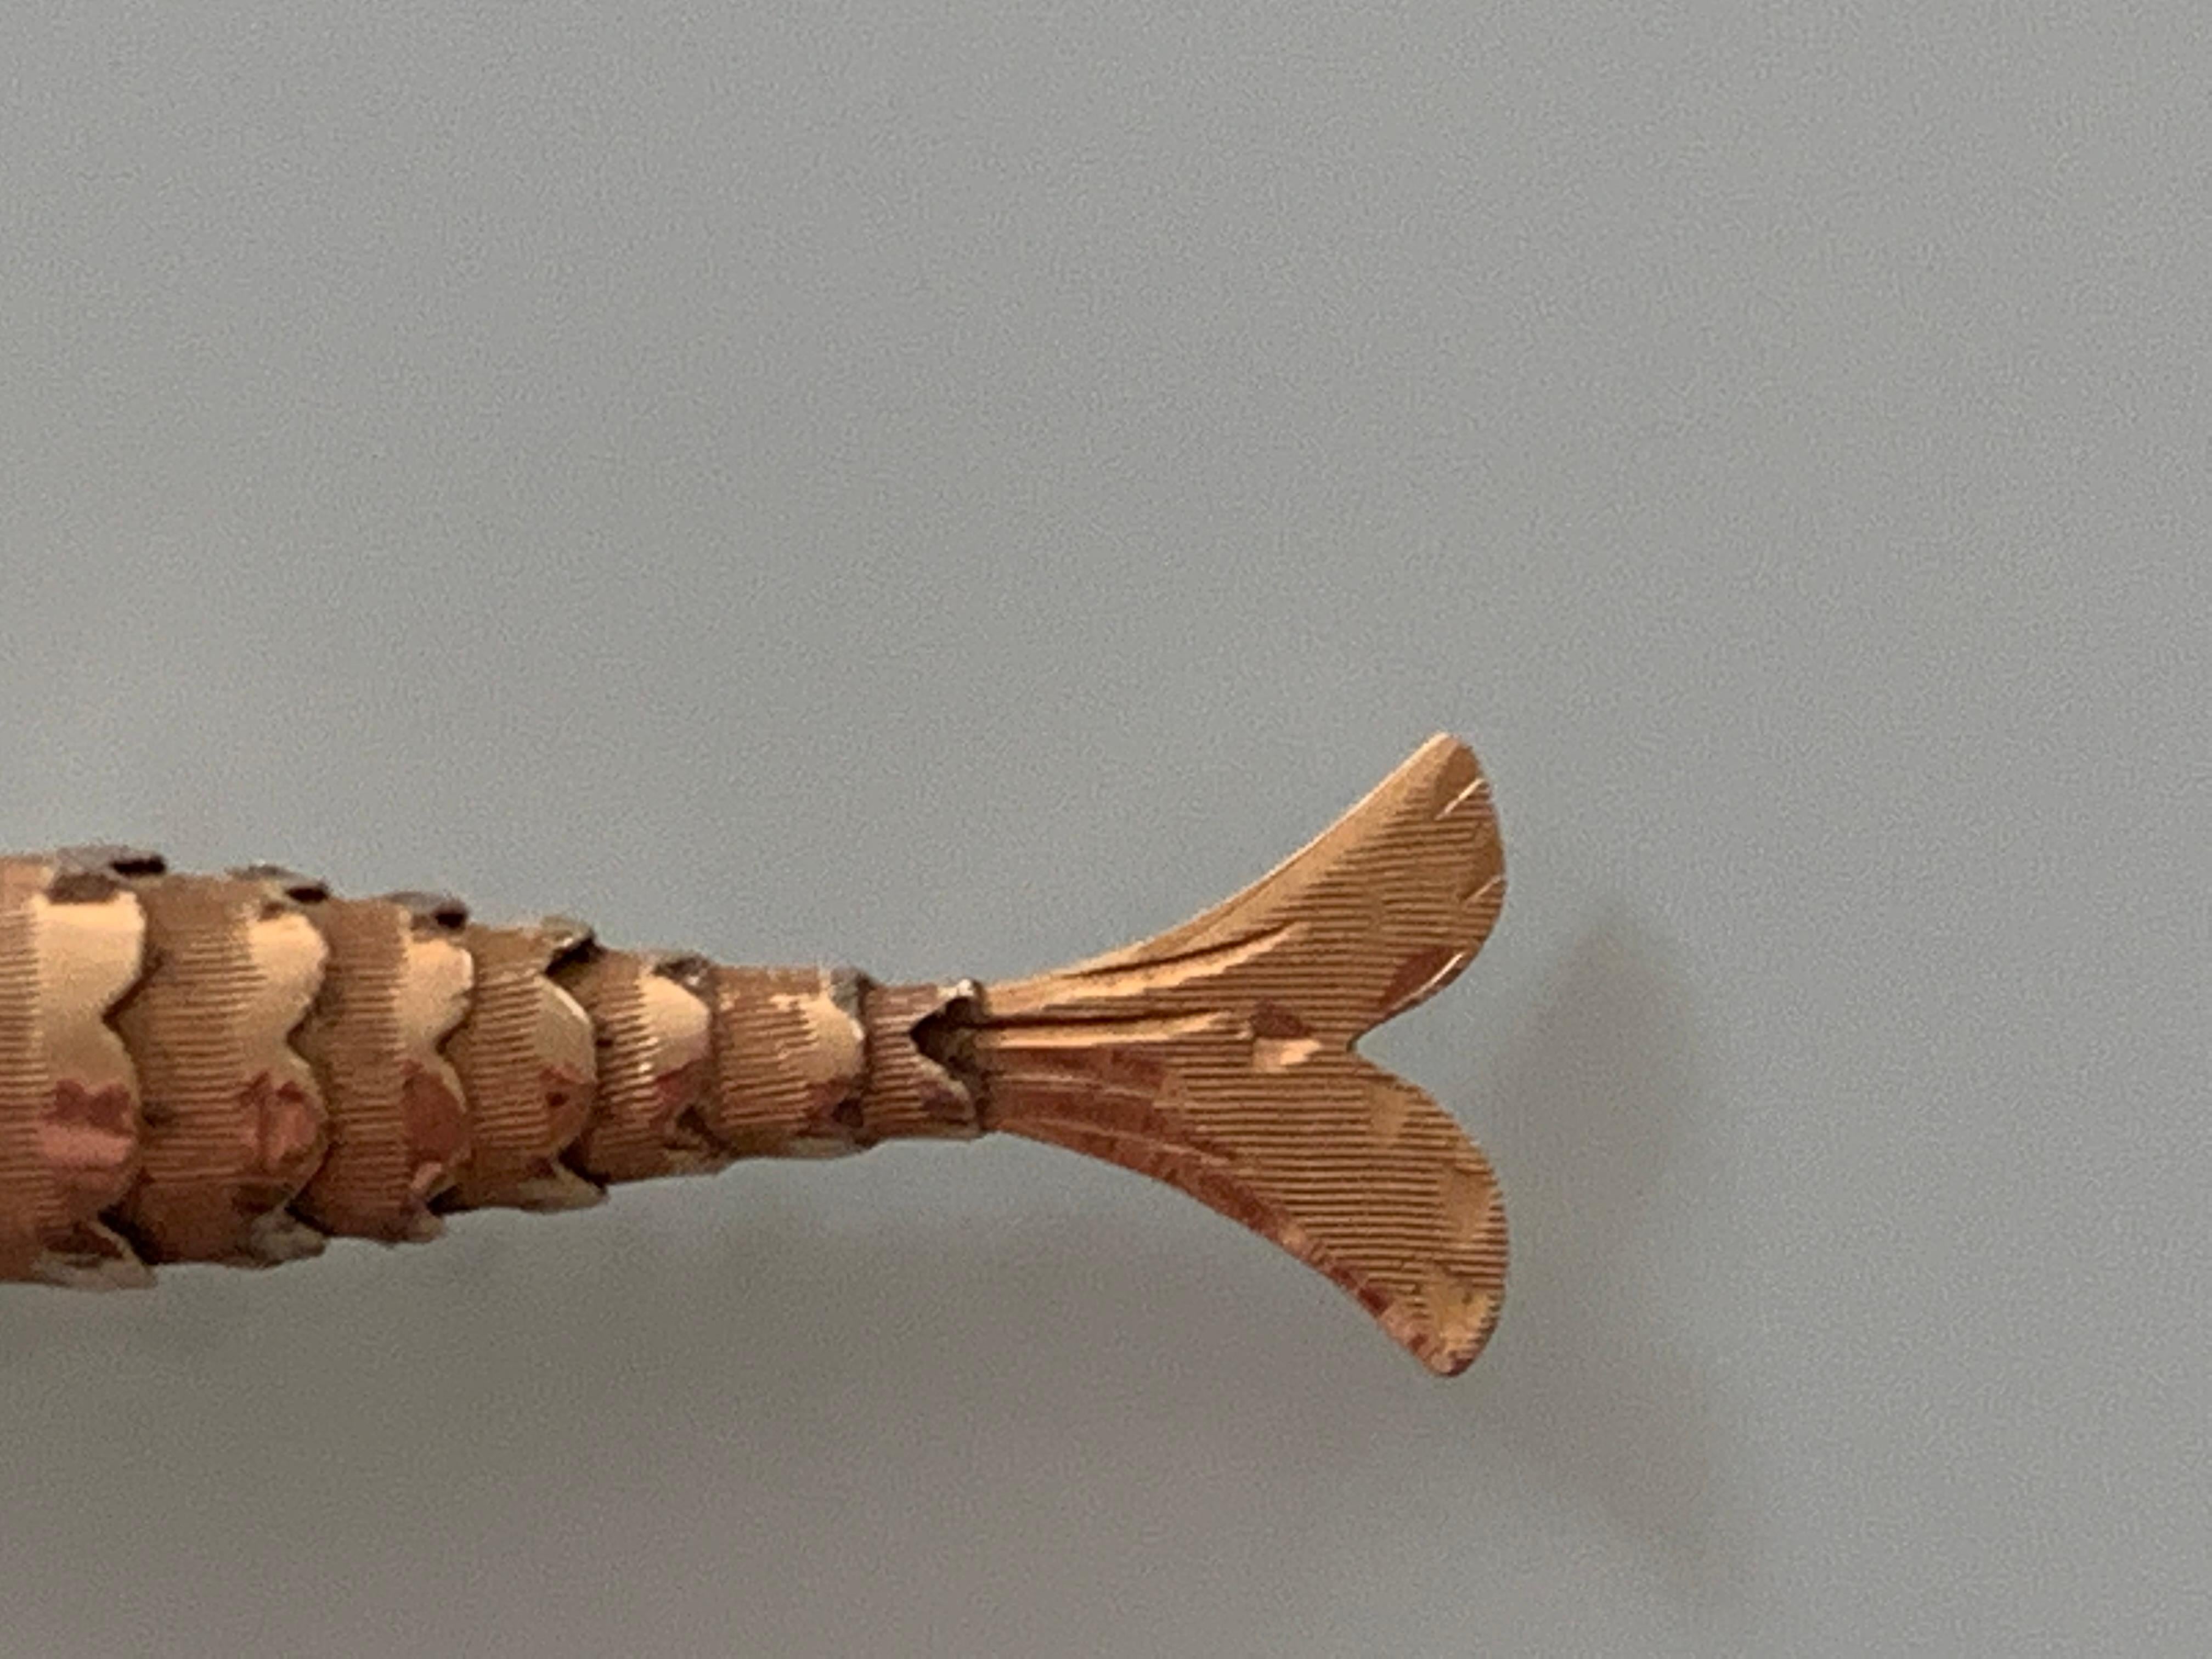 articulated fish necklace